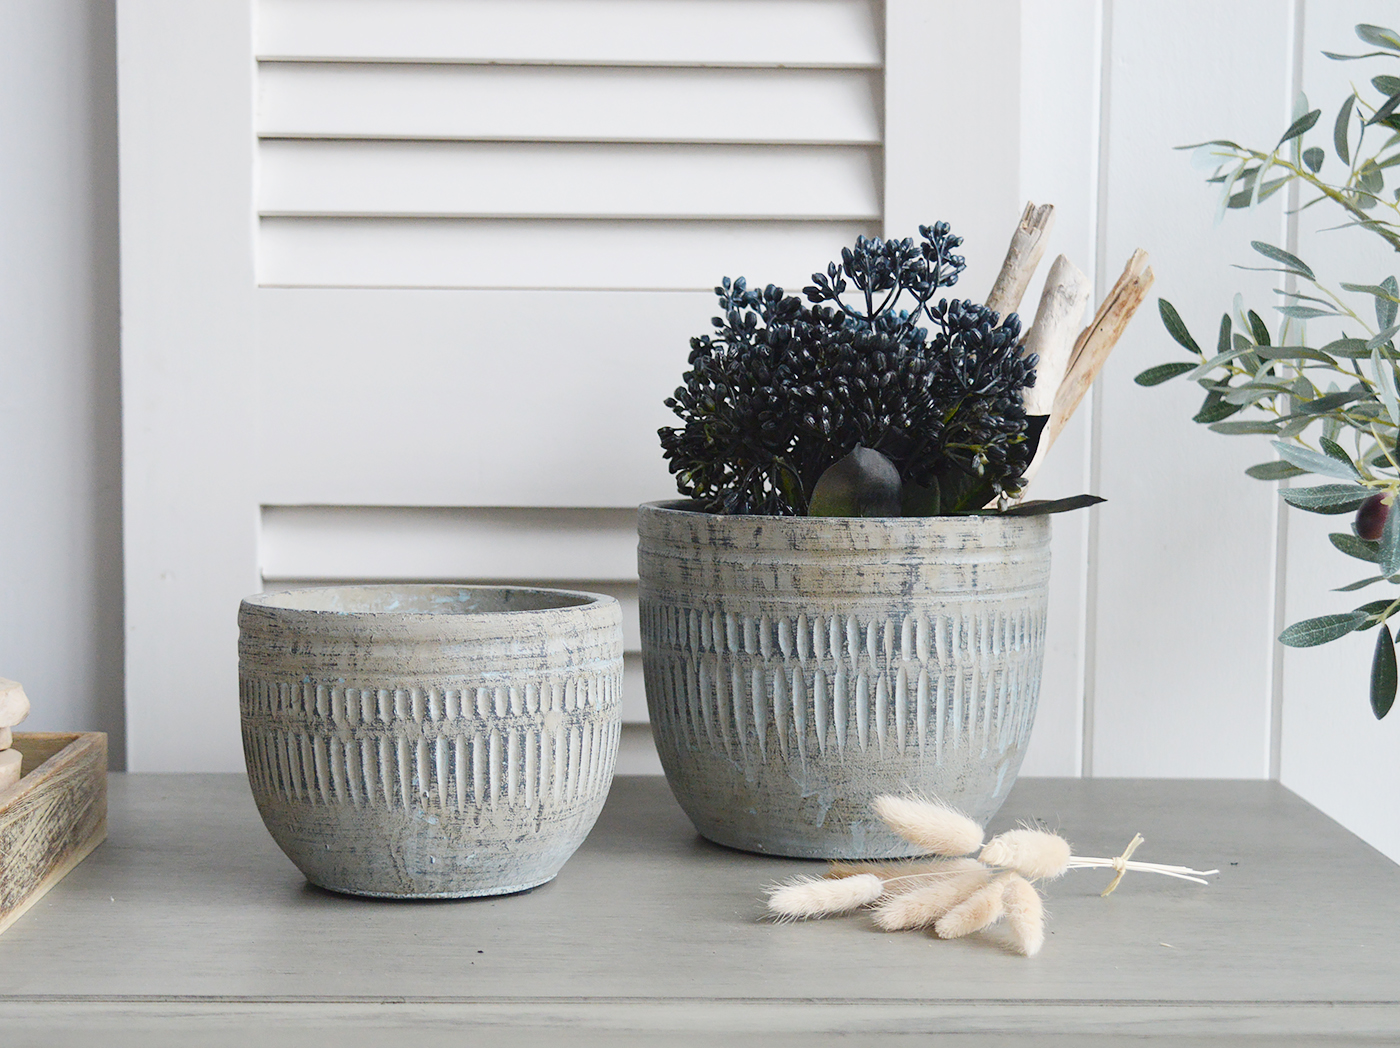 Wickford Antiqued Blue Grey Cement Pots Planters - New England Style Interiors. Home decor and accessories for console table, shelf and coffee table styling and to complement our furniture for Coastal, Country and modern farmhouse styled homes